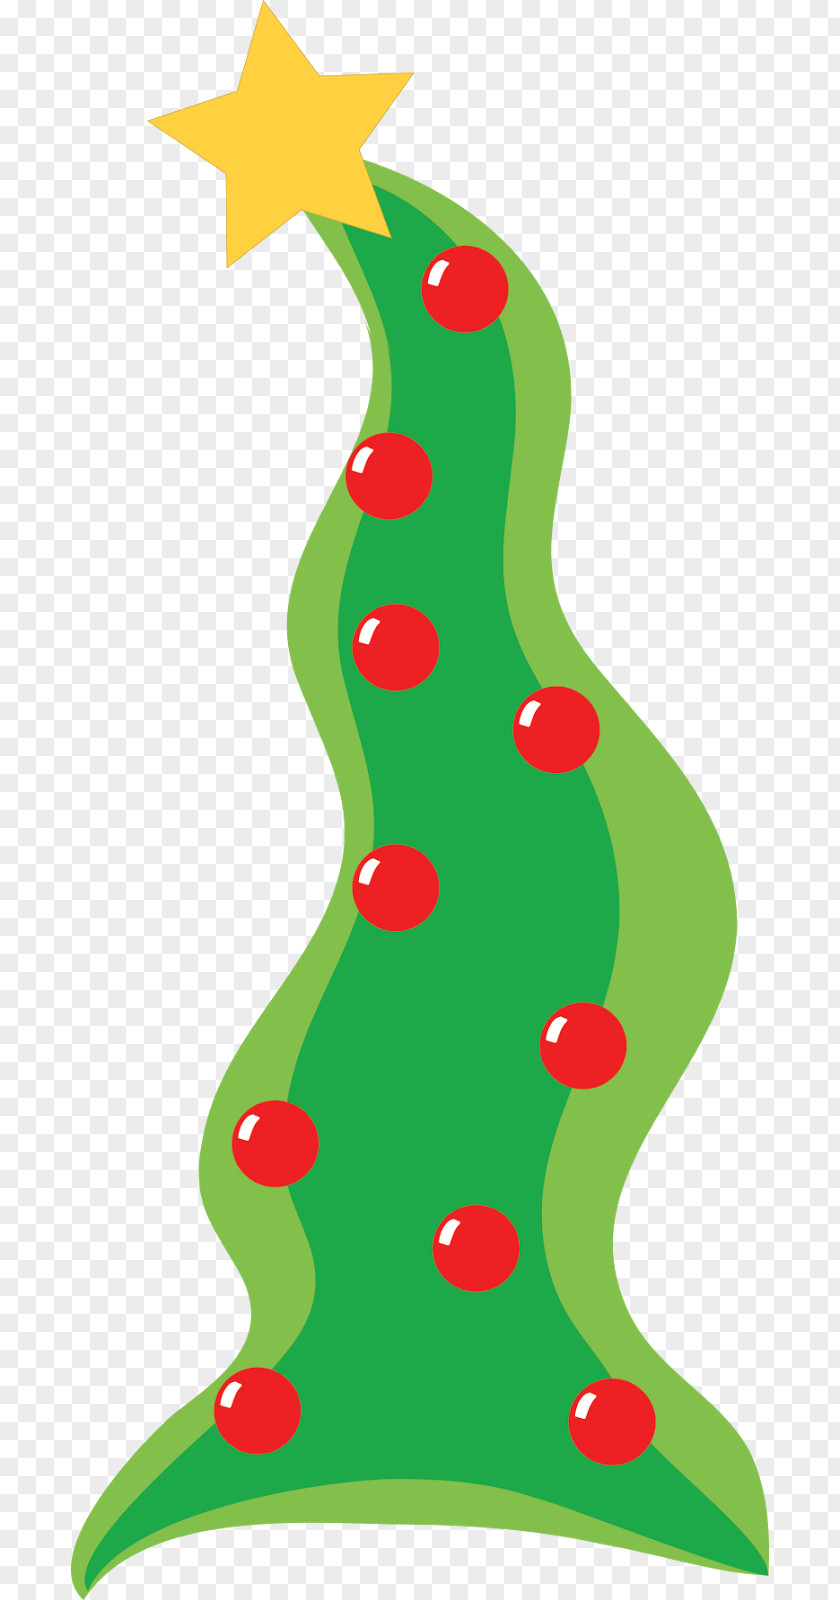 Christmas Tree Clip Art Day December Ornament PNG